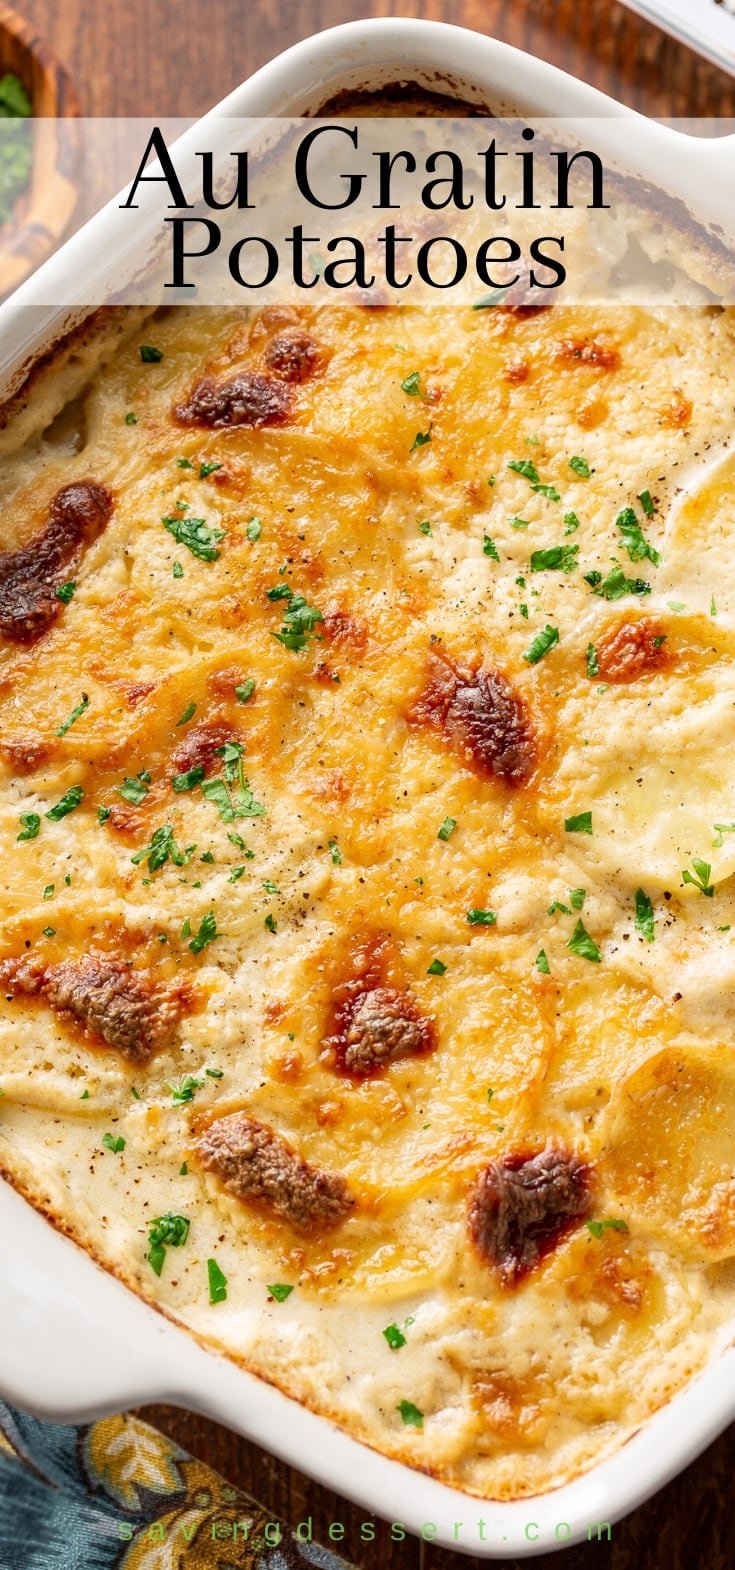 A pan filled with hot Au Gratin Potatoes recipe garnished with parsley